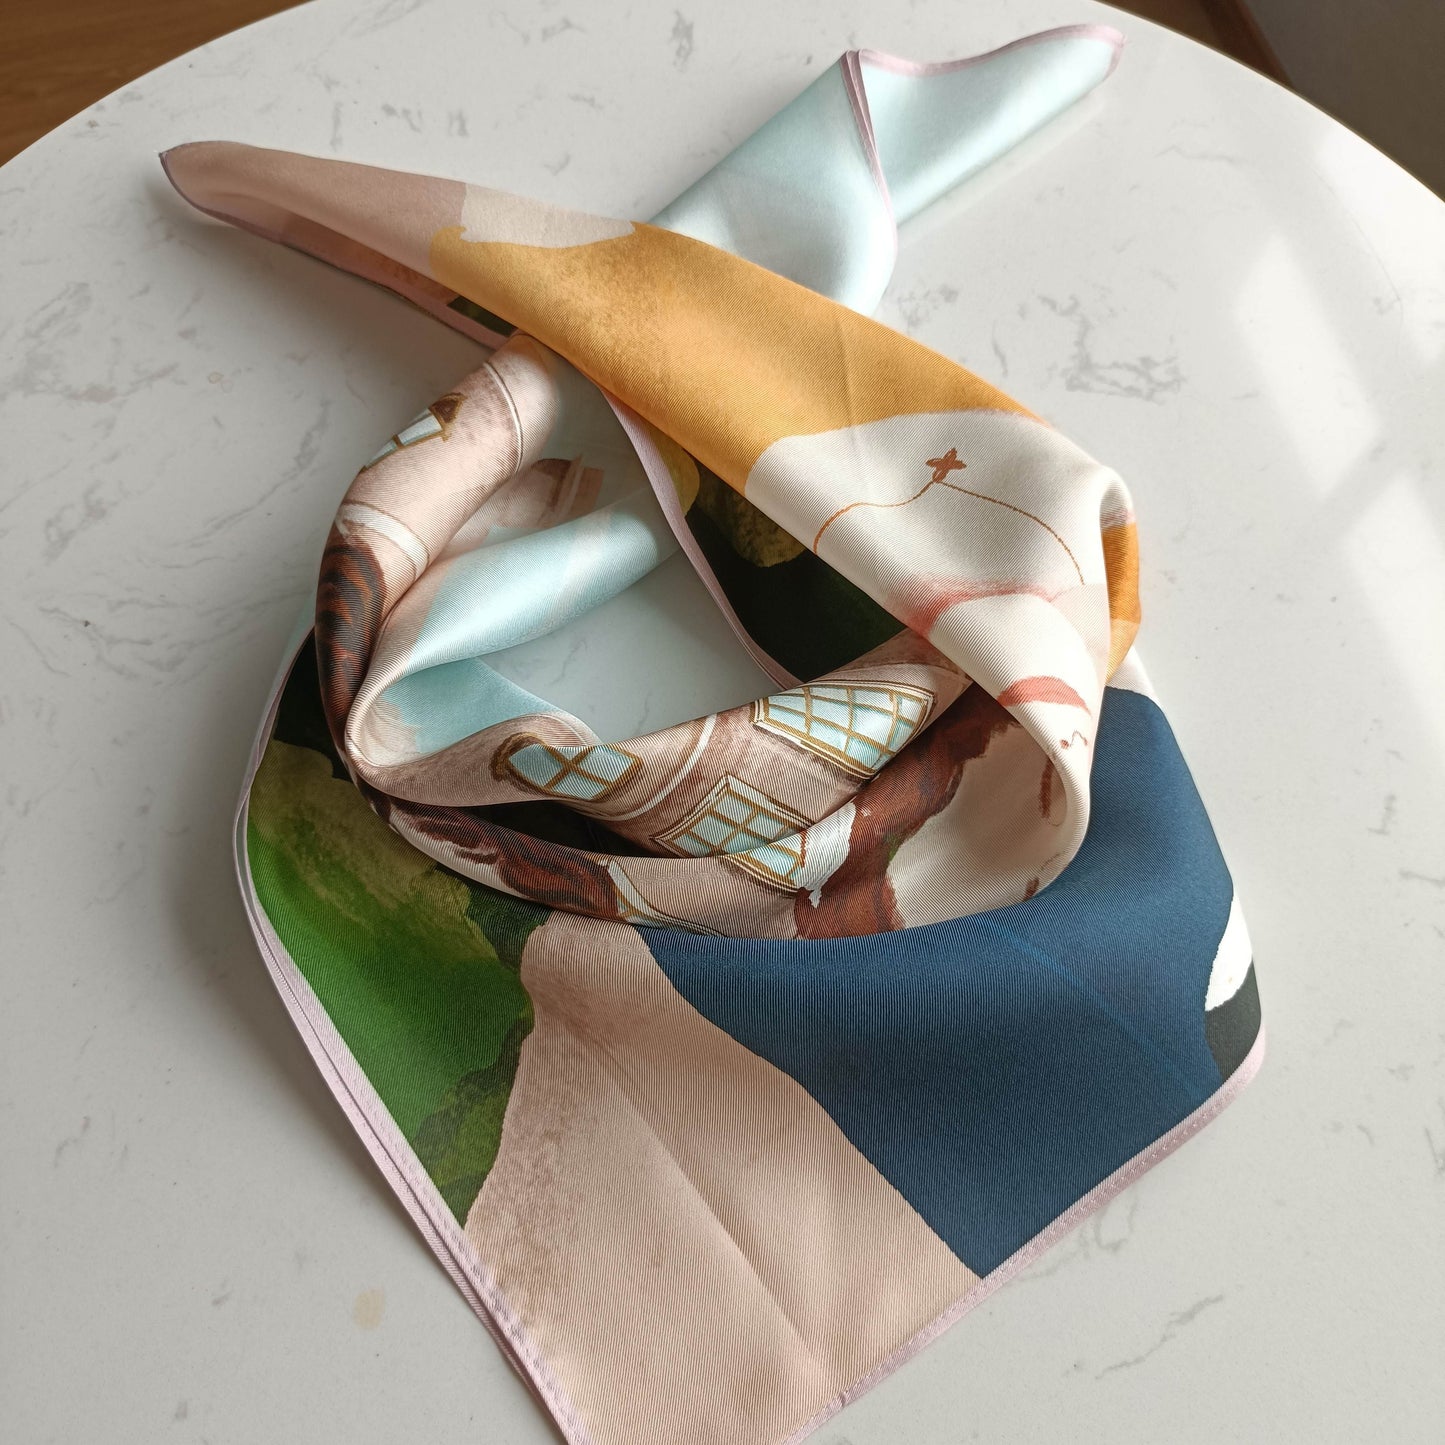 This bookish silk scarf features an elegant illustration of Pride and Prejudice's main characters, Mr. Darcy and Elizabeth Bennet. Made from high-quality silk, it has a luxurious texture and a lovely sheen.